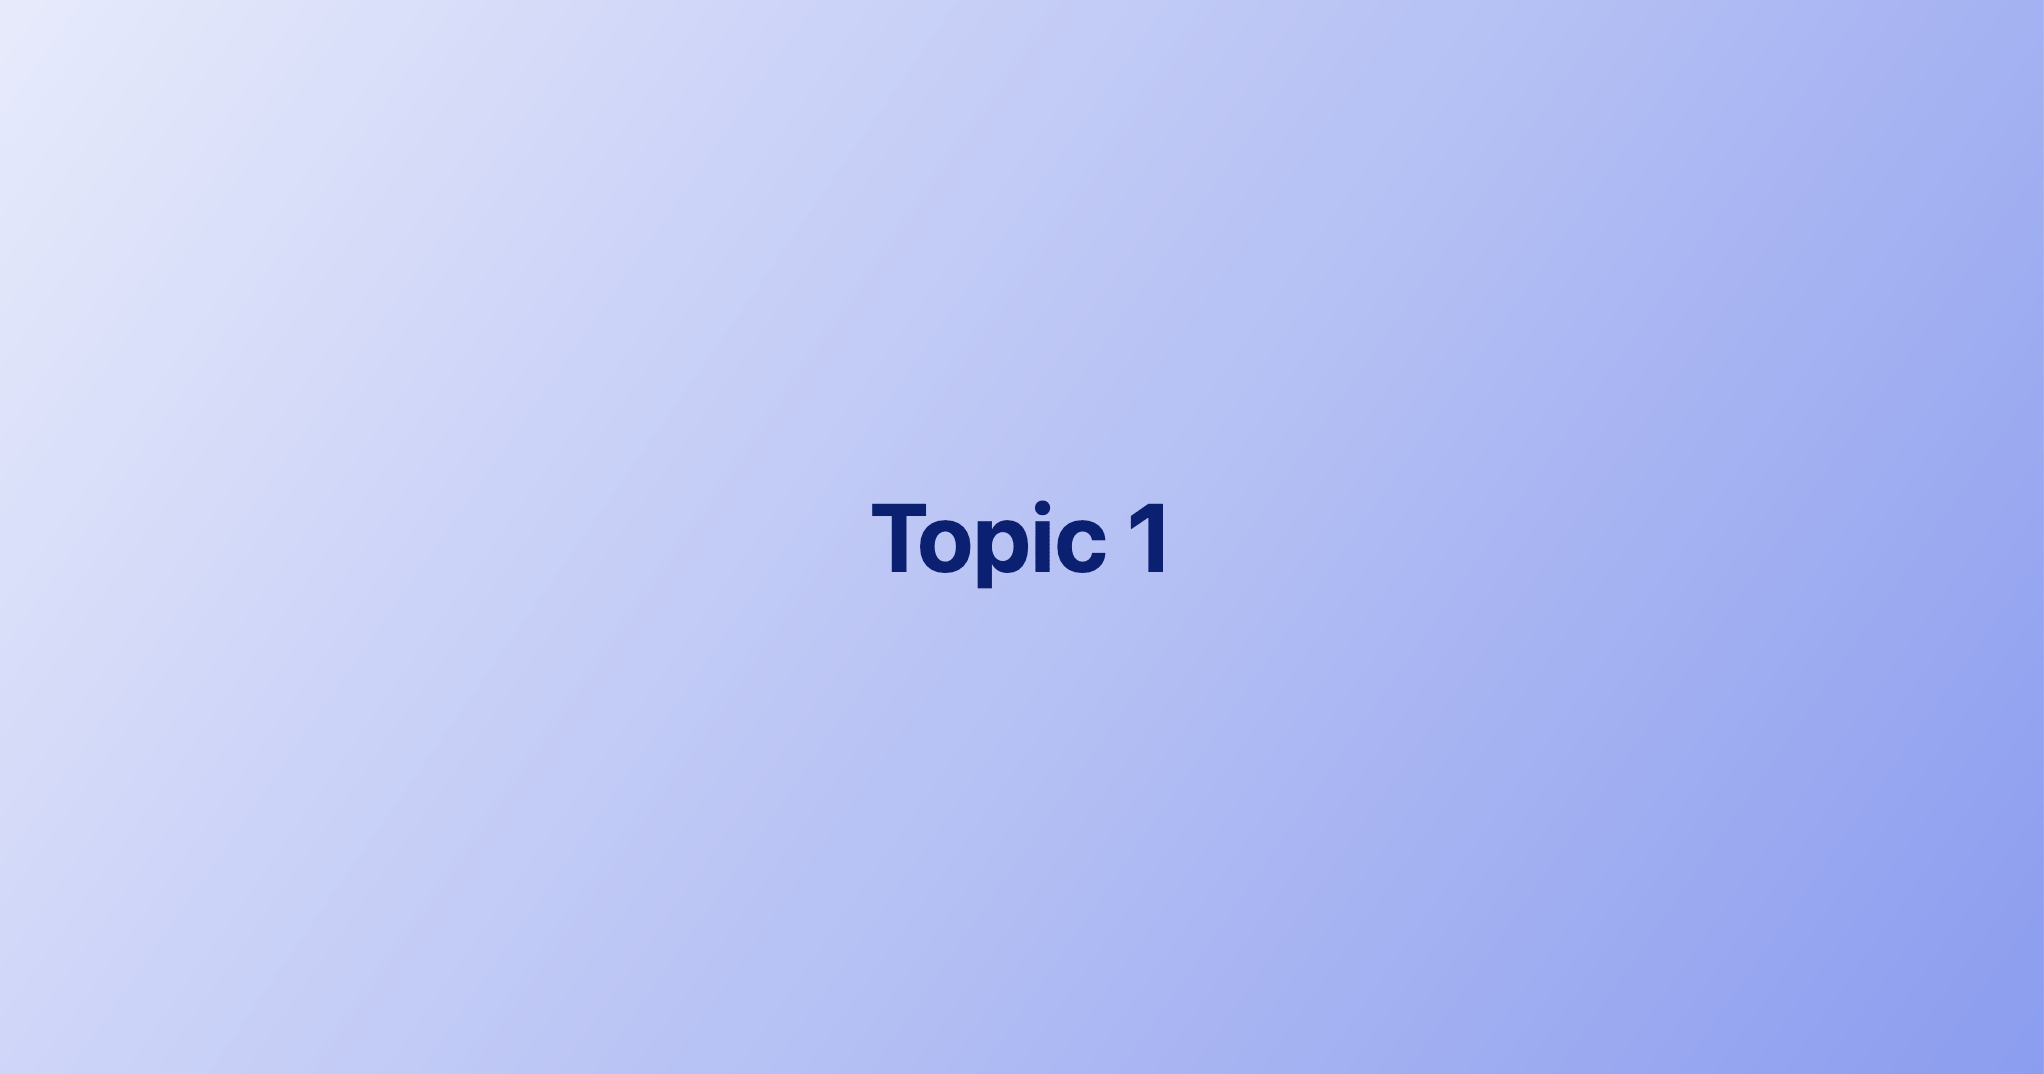 A slide with the text Topic 1 in dark blue and a soft linear gradient that goes from a super light blue to a brighter blue, going from left to right.